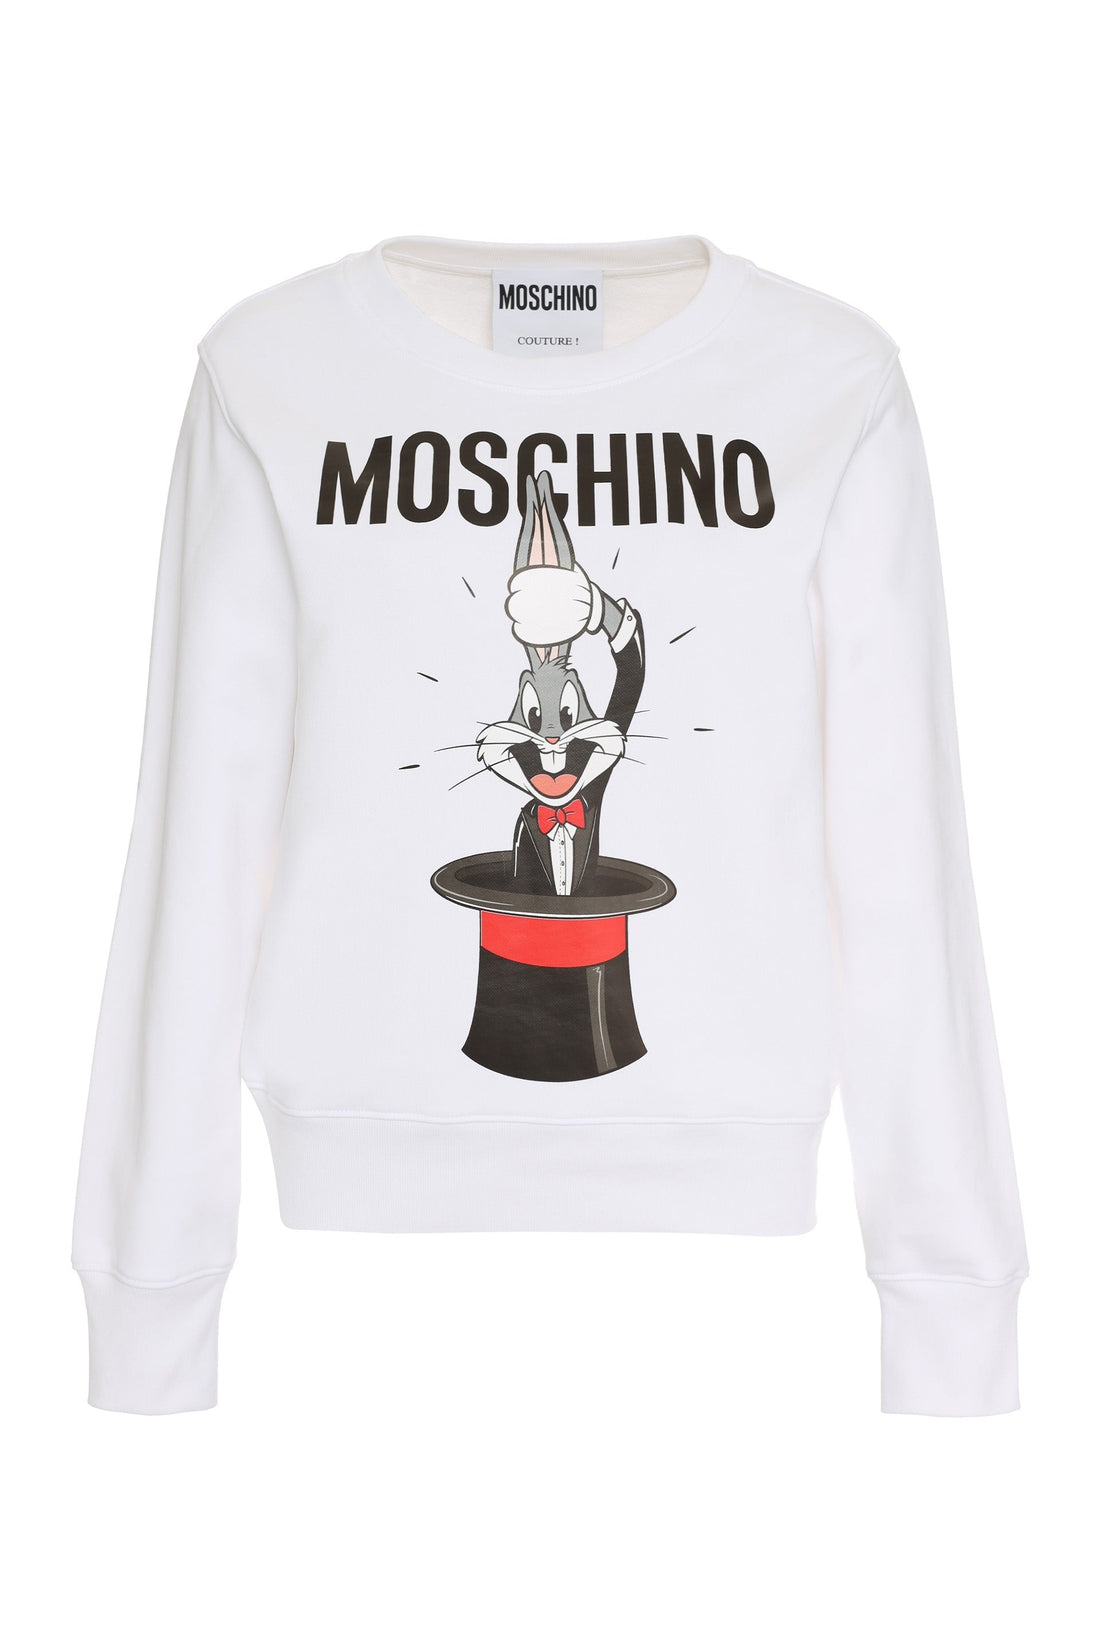 Moschino-OUTLET-SALE-Bugs Bunny printed cotton sweatshirt-ARCHIVIST